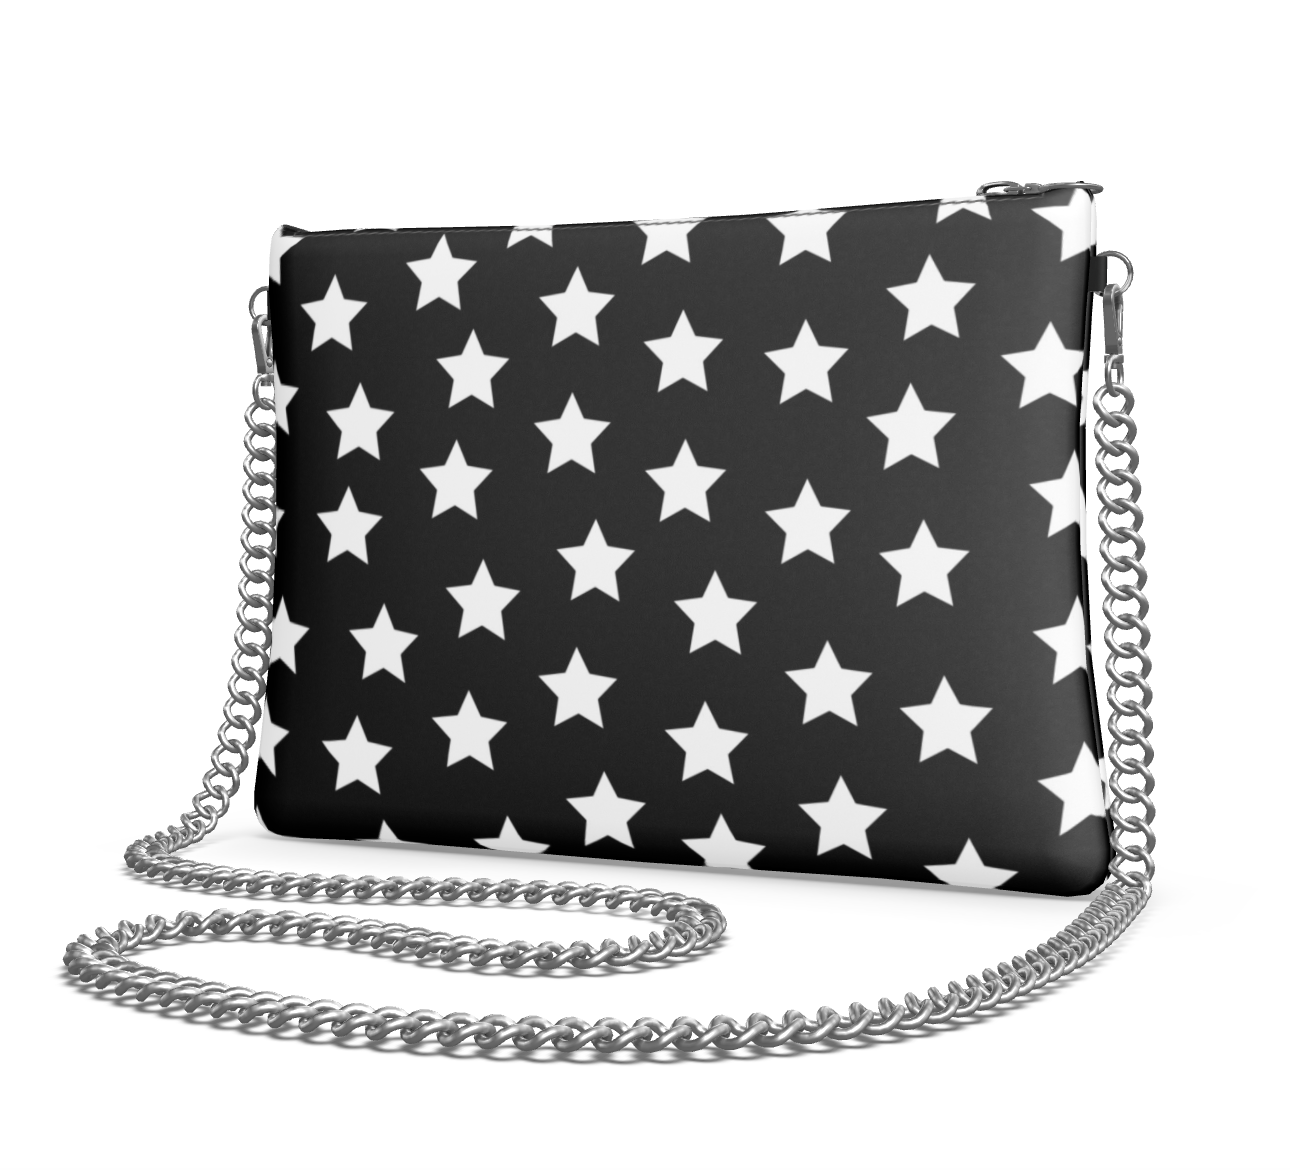 UNTITLED BOUTIQUE Black Leather Constellation Star Crossbody Bag - Limited Edition